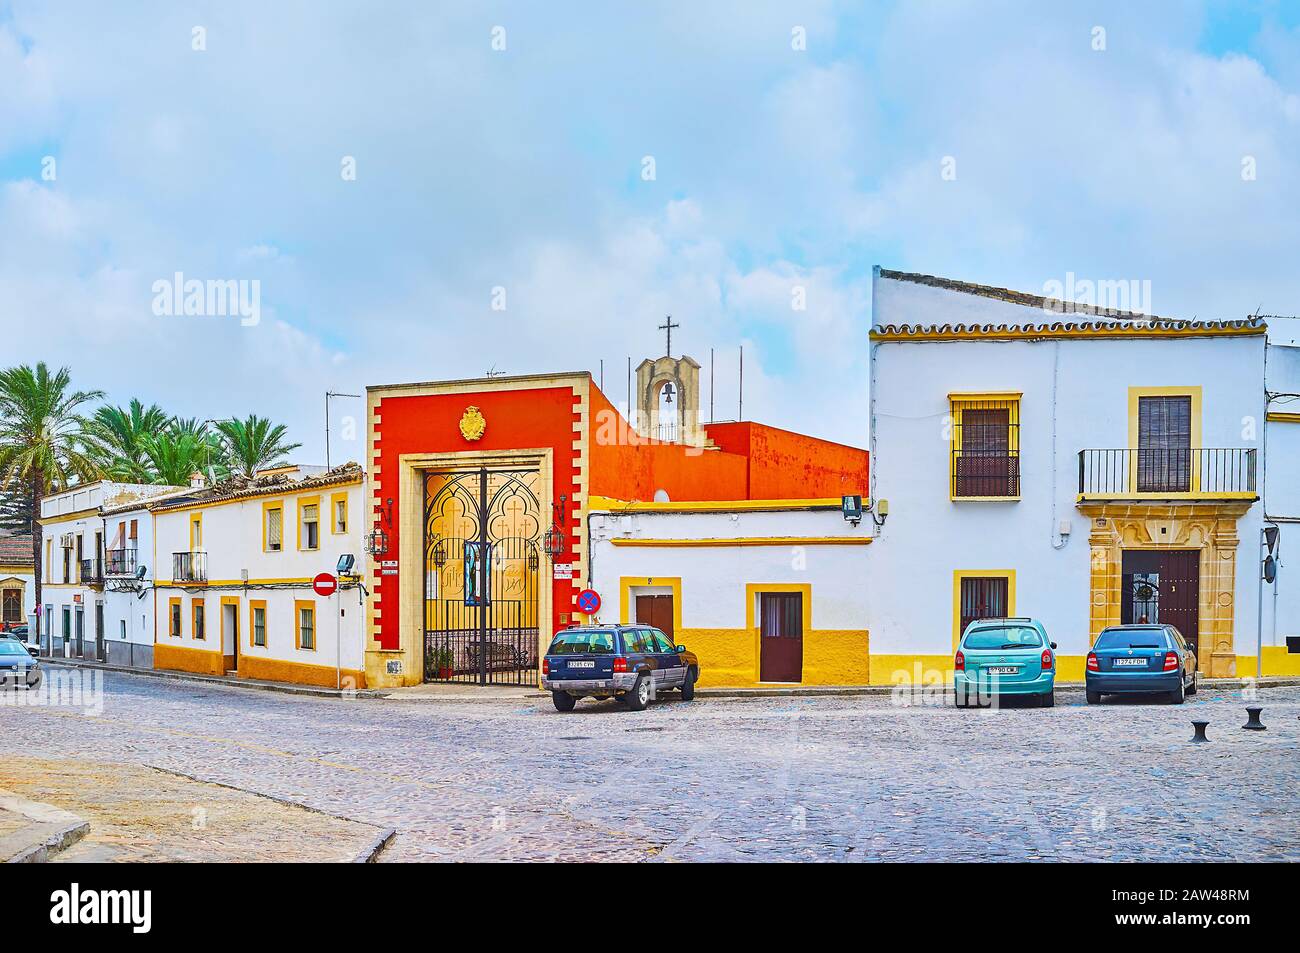 JEREZ, SPAIN - SEPTEMBER 20, 2019: The bright red gate of Santa Marta Chapel, located in San Mateo Square of old town, on September 20 in Jerez Stock Photo